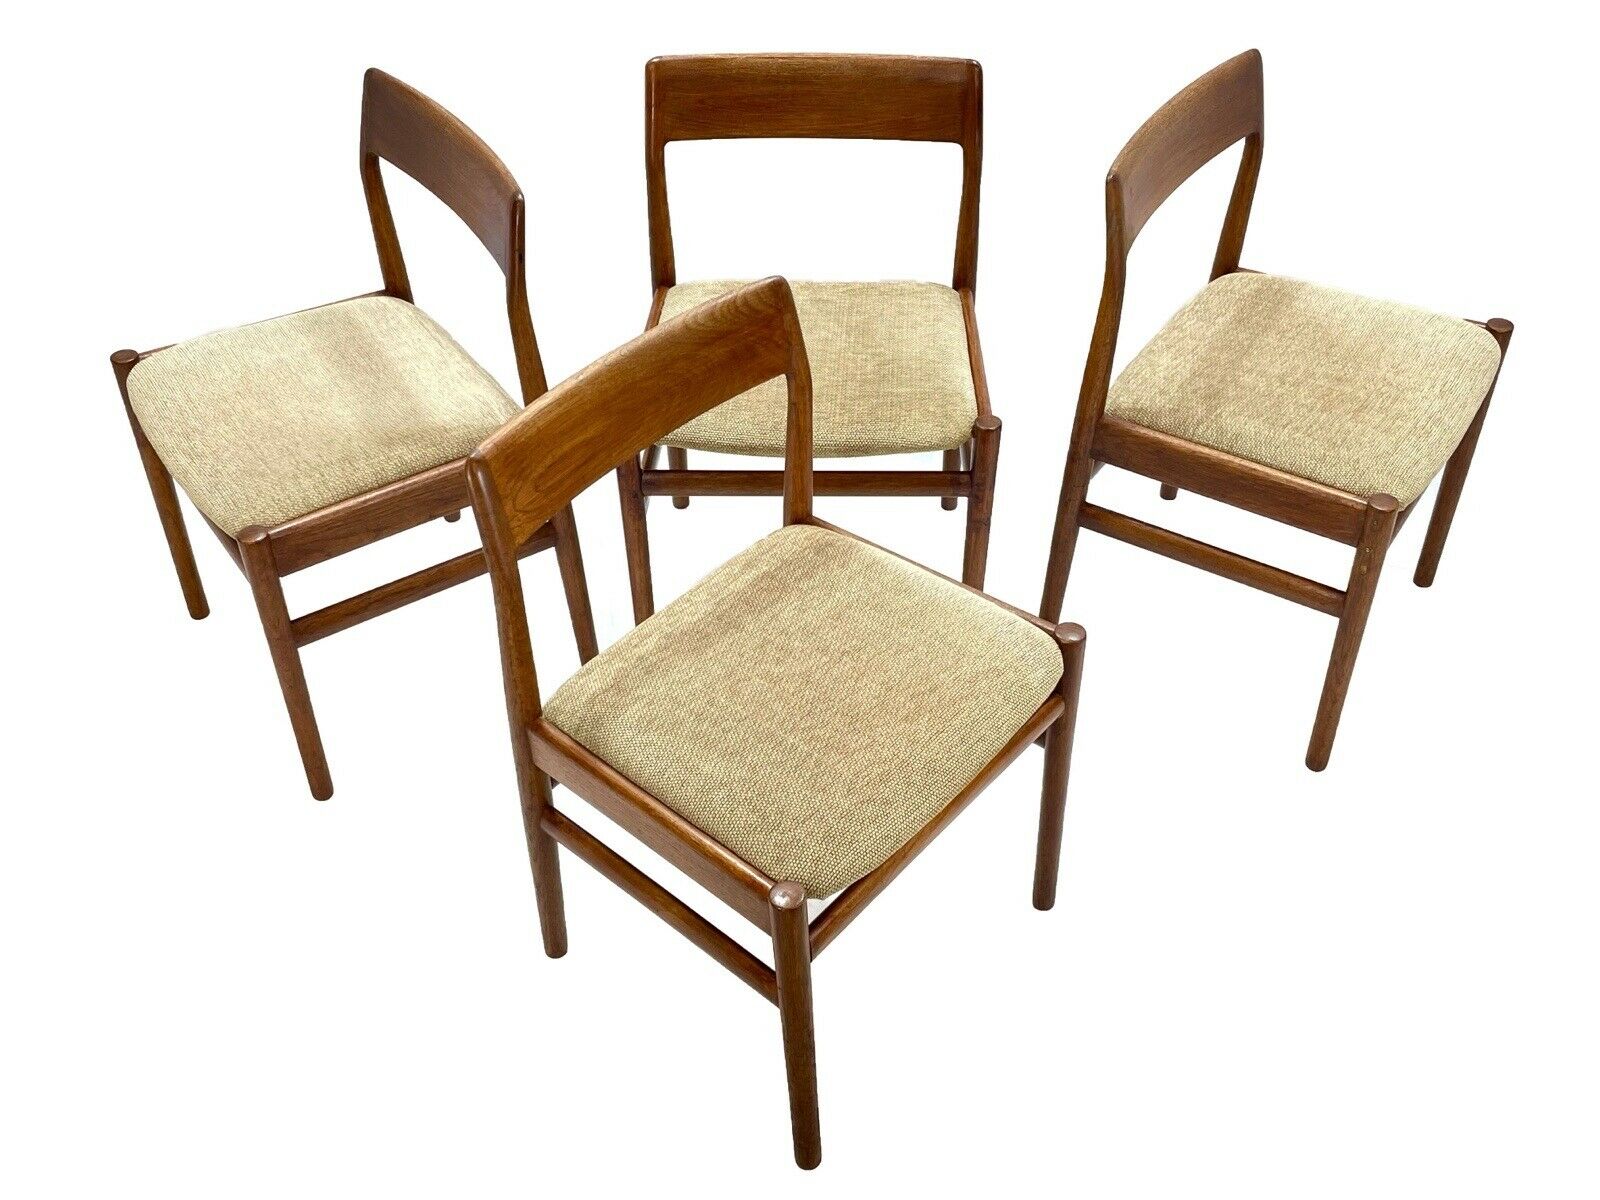 Dalescraft, Mid Century Modern, Set Of 4 Dining Chairs - Danish Style